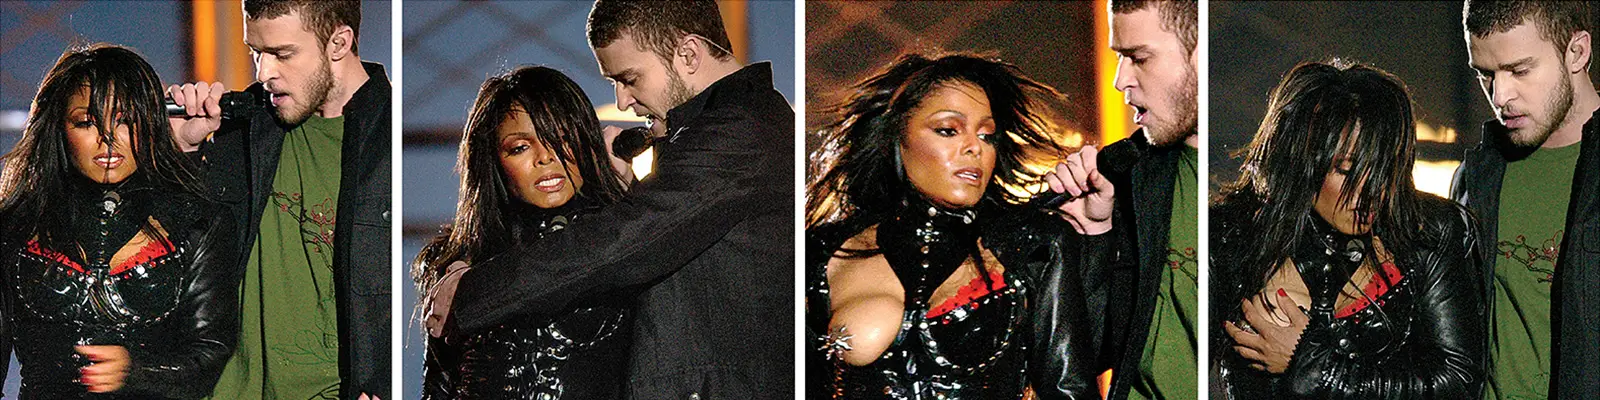 diane yum recommends janet jackson super bowl nipple gif pic